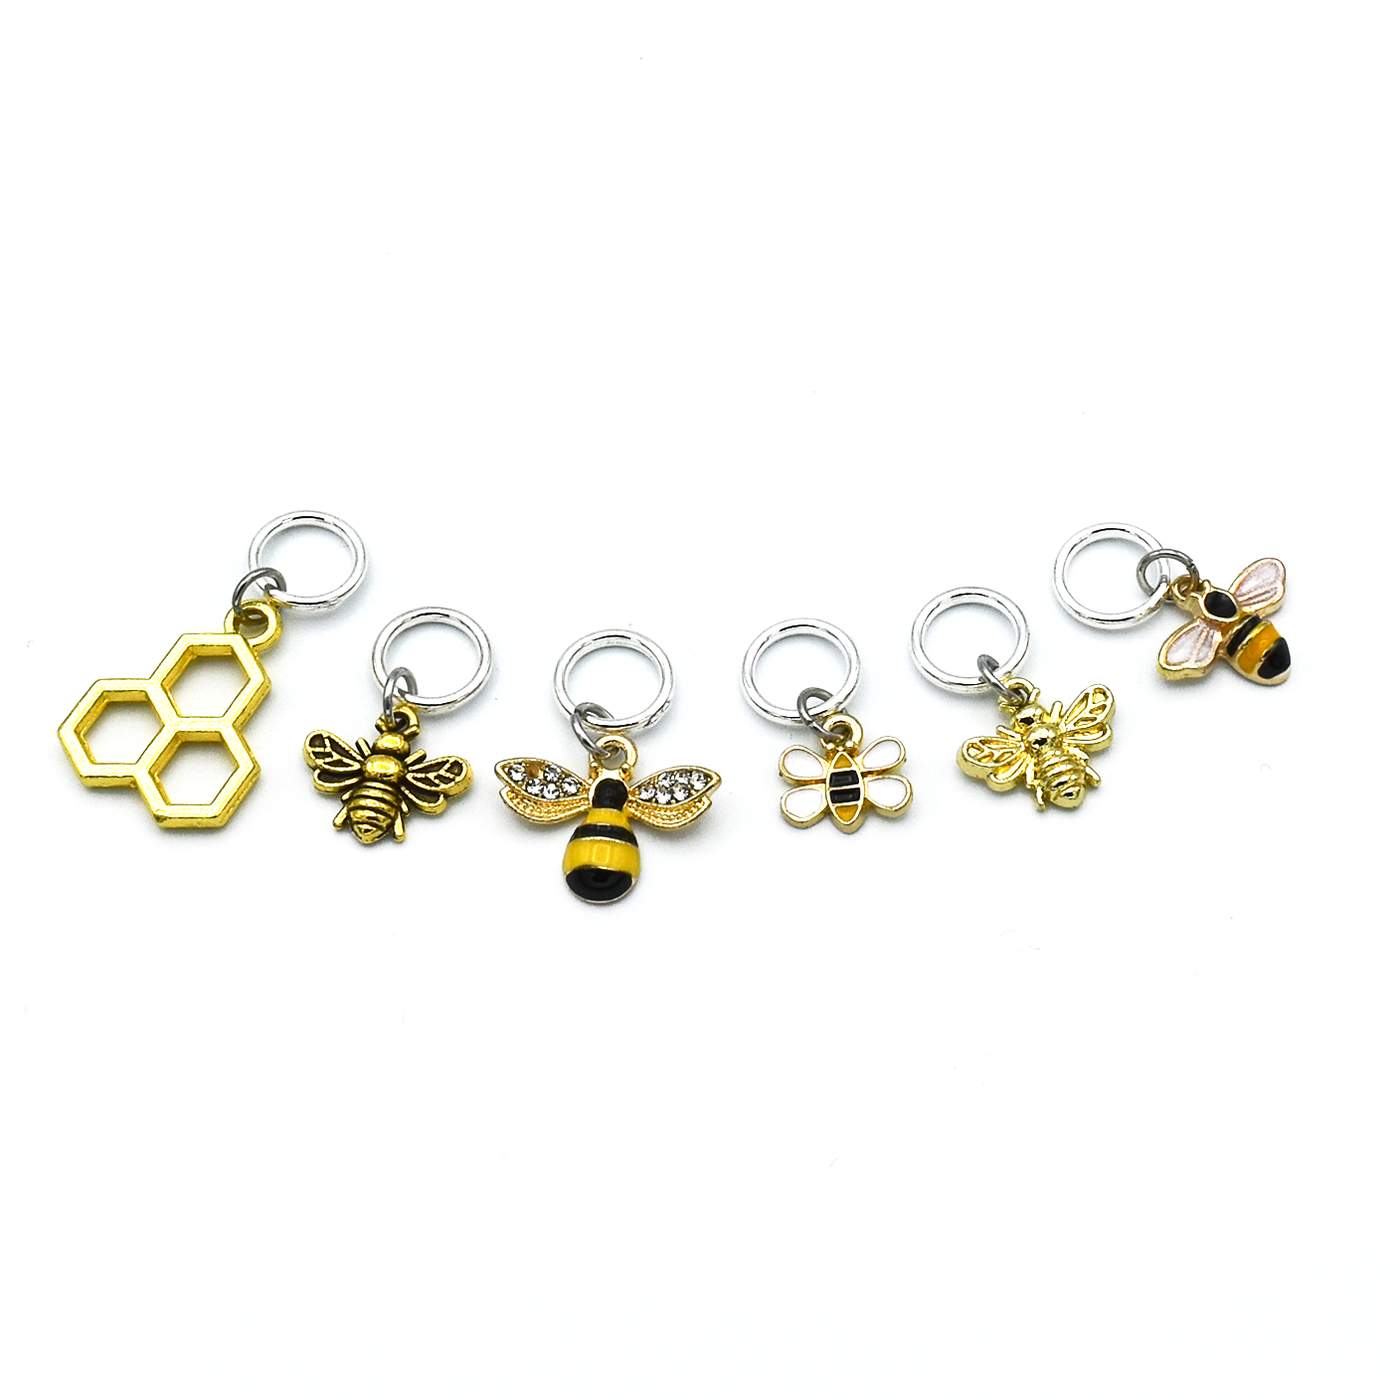  Cute Owls Ring Stitch Markers for Knitting With Storage Case, Handmade by Pretty Warm Designs